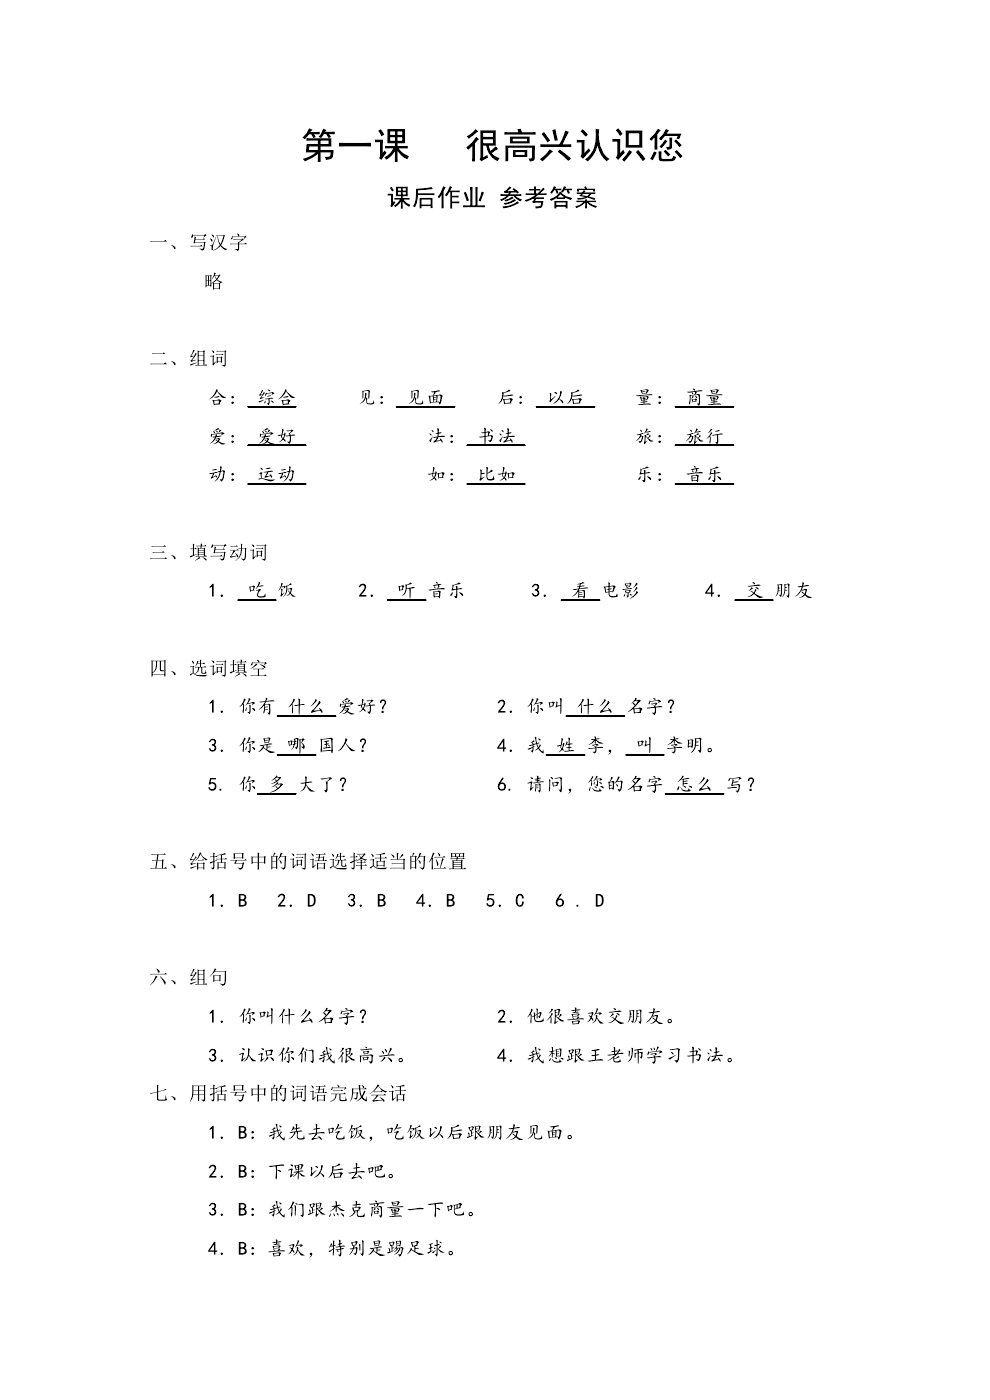 Erya Chinese - Elementary Chinese: Comprehensive Course Ⅰ vol 